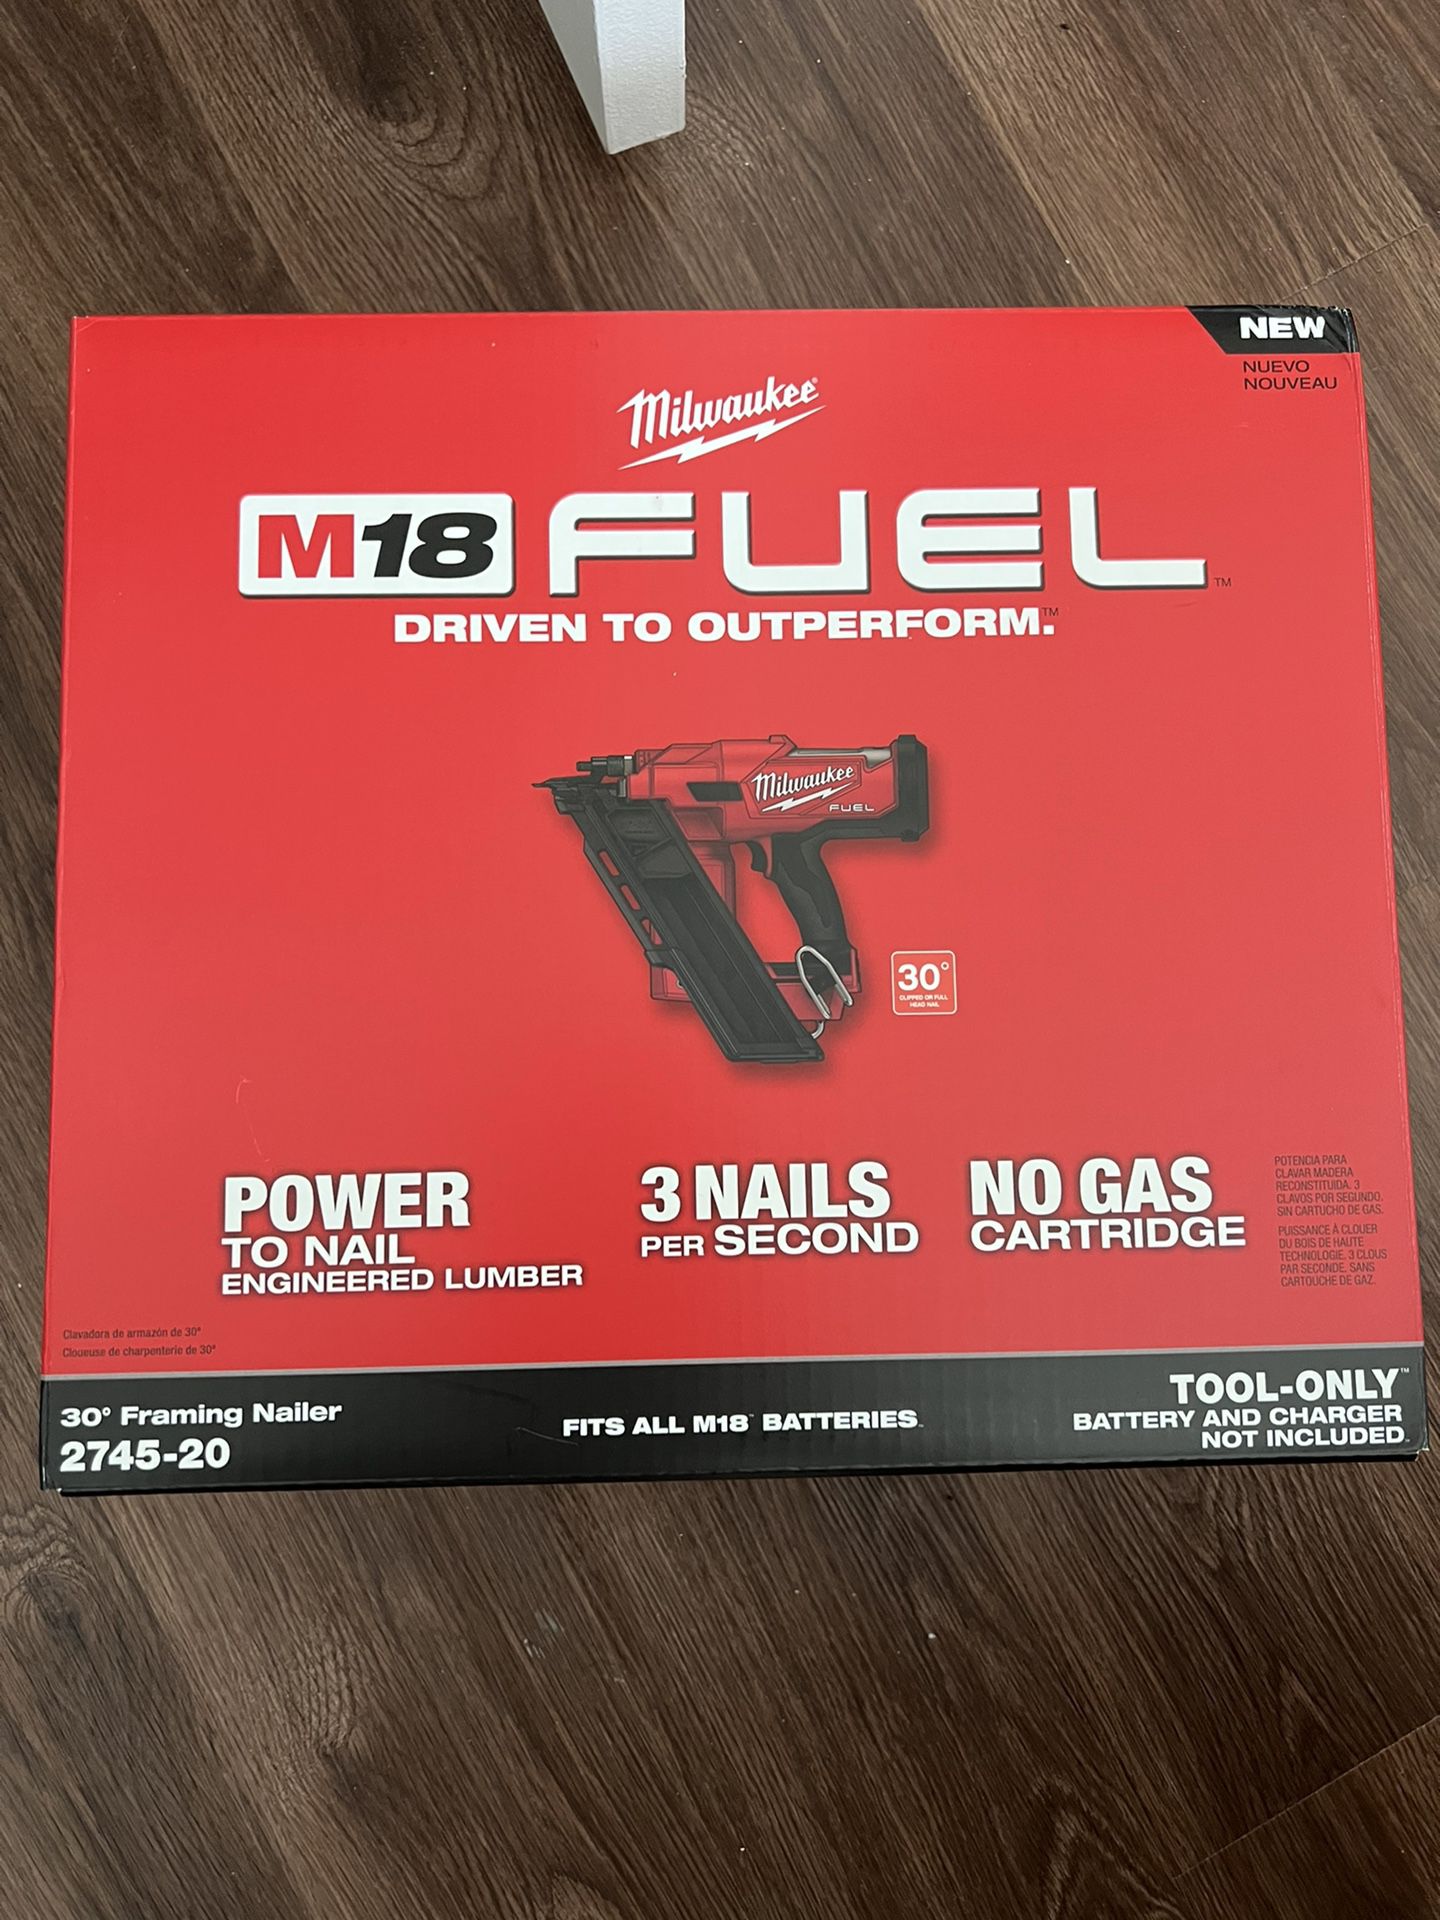 NEW Milwaukee M18 FUEL 30 Framing Nailer (Tool-Only)